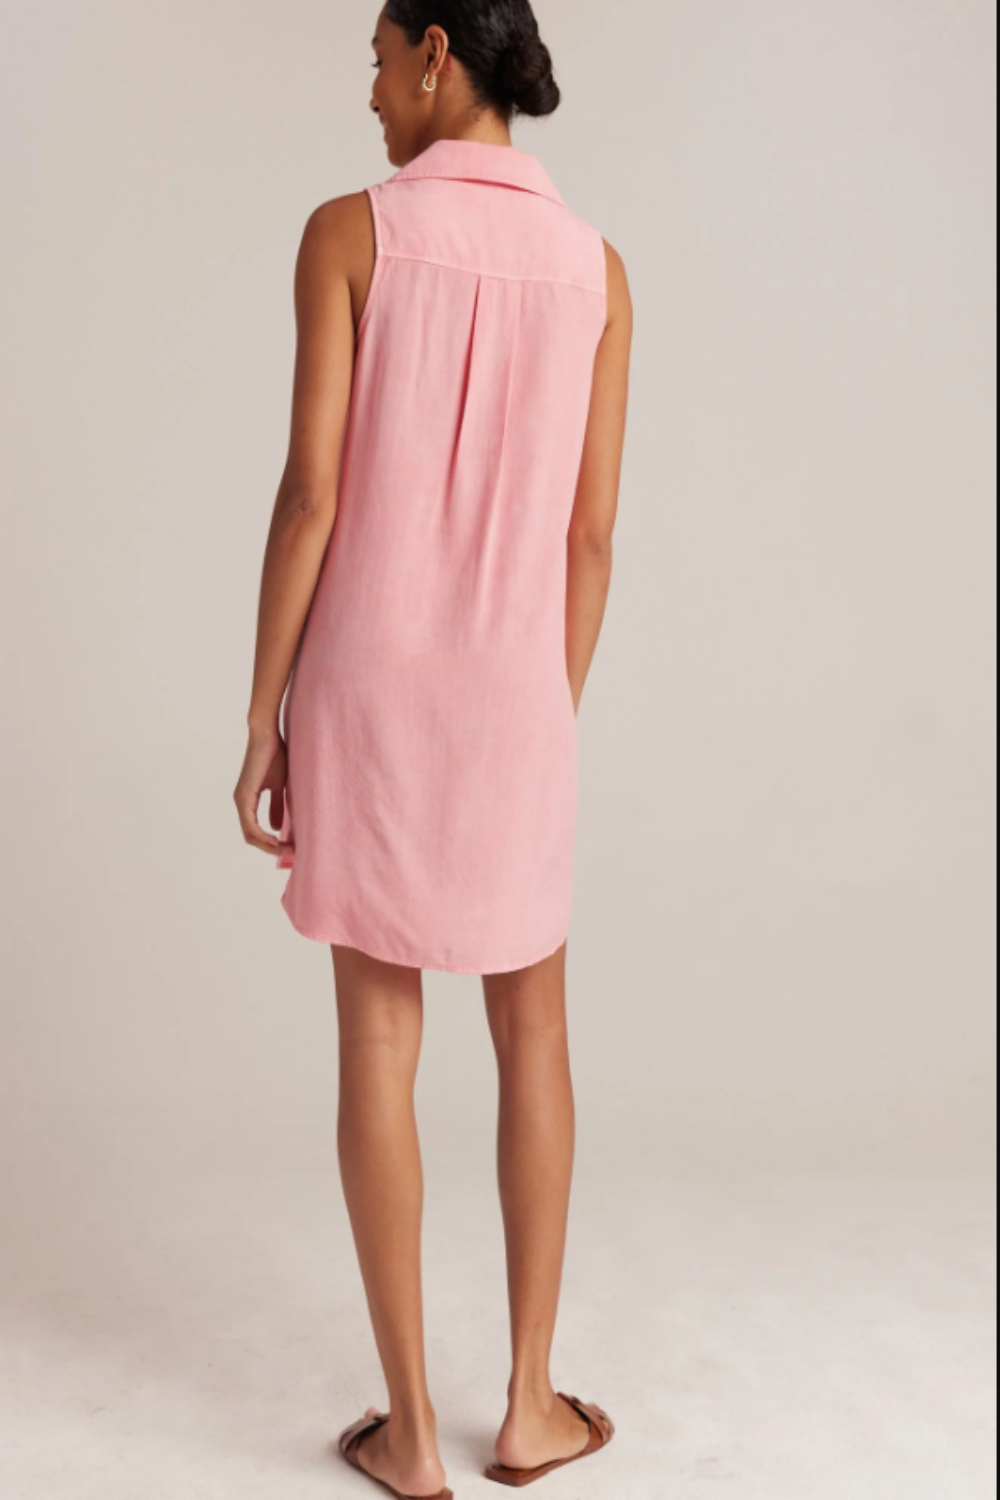 Sleeveless A-line Dress in Blossom Pink